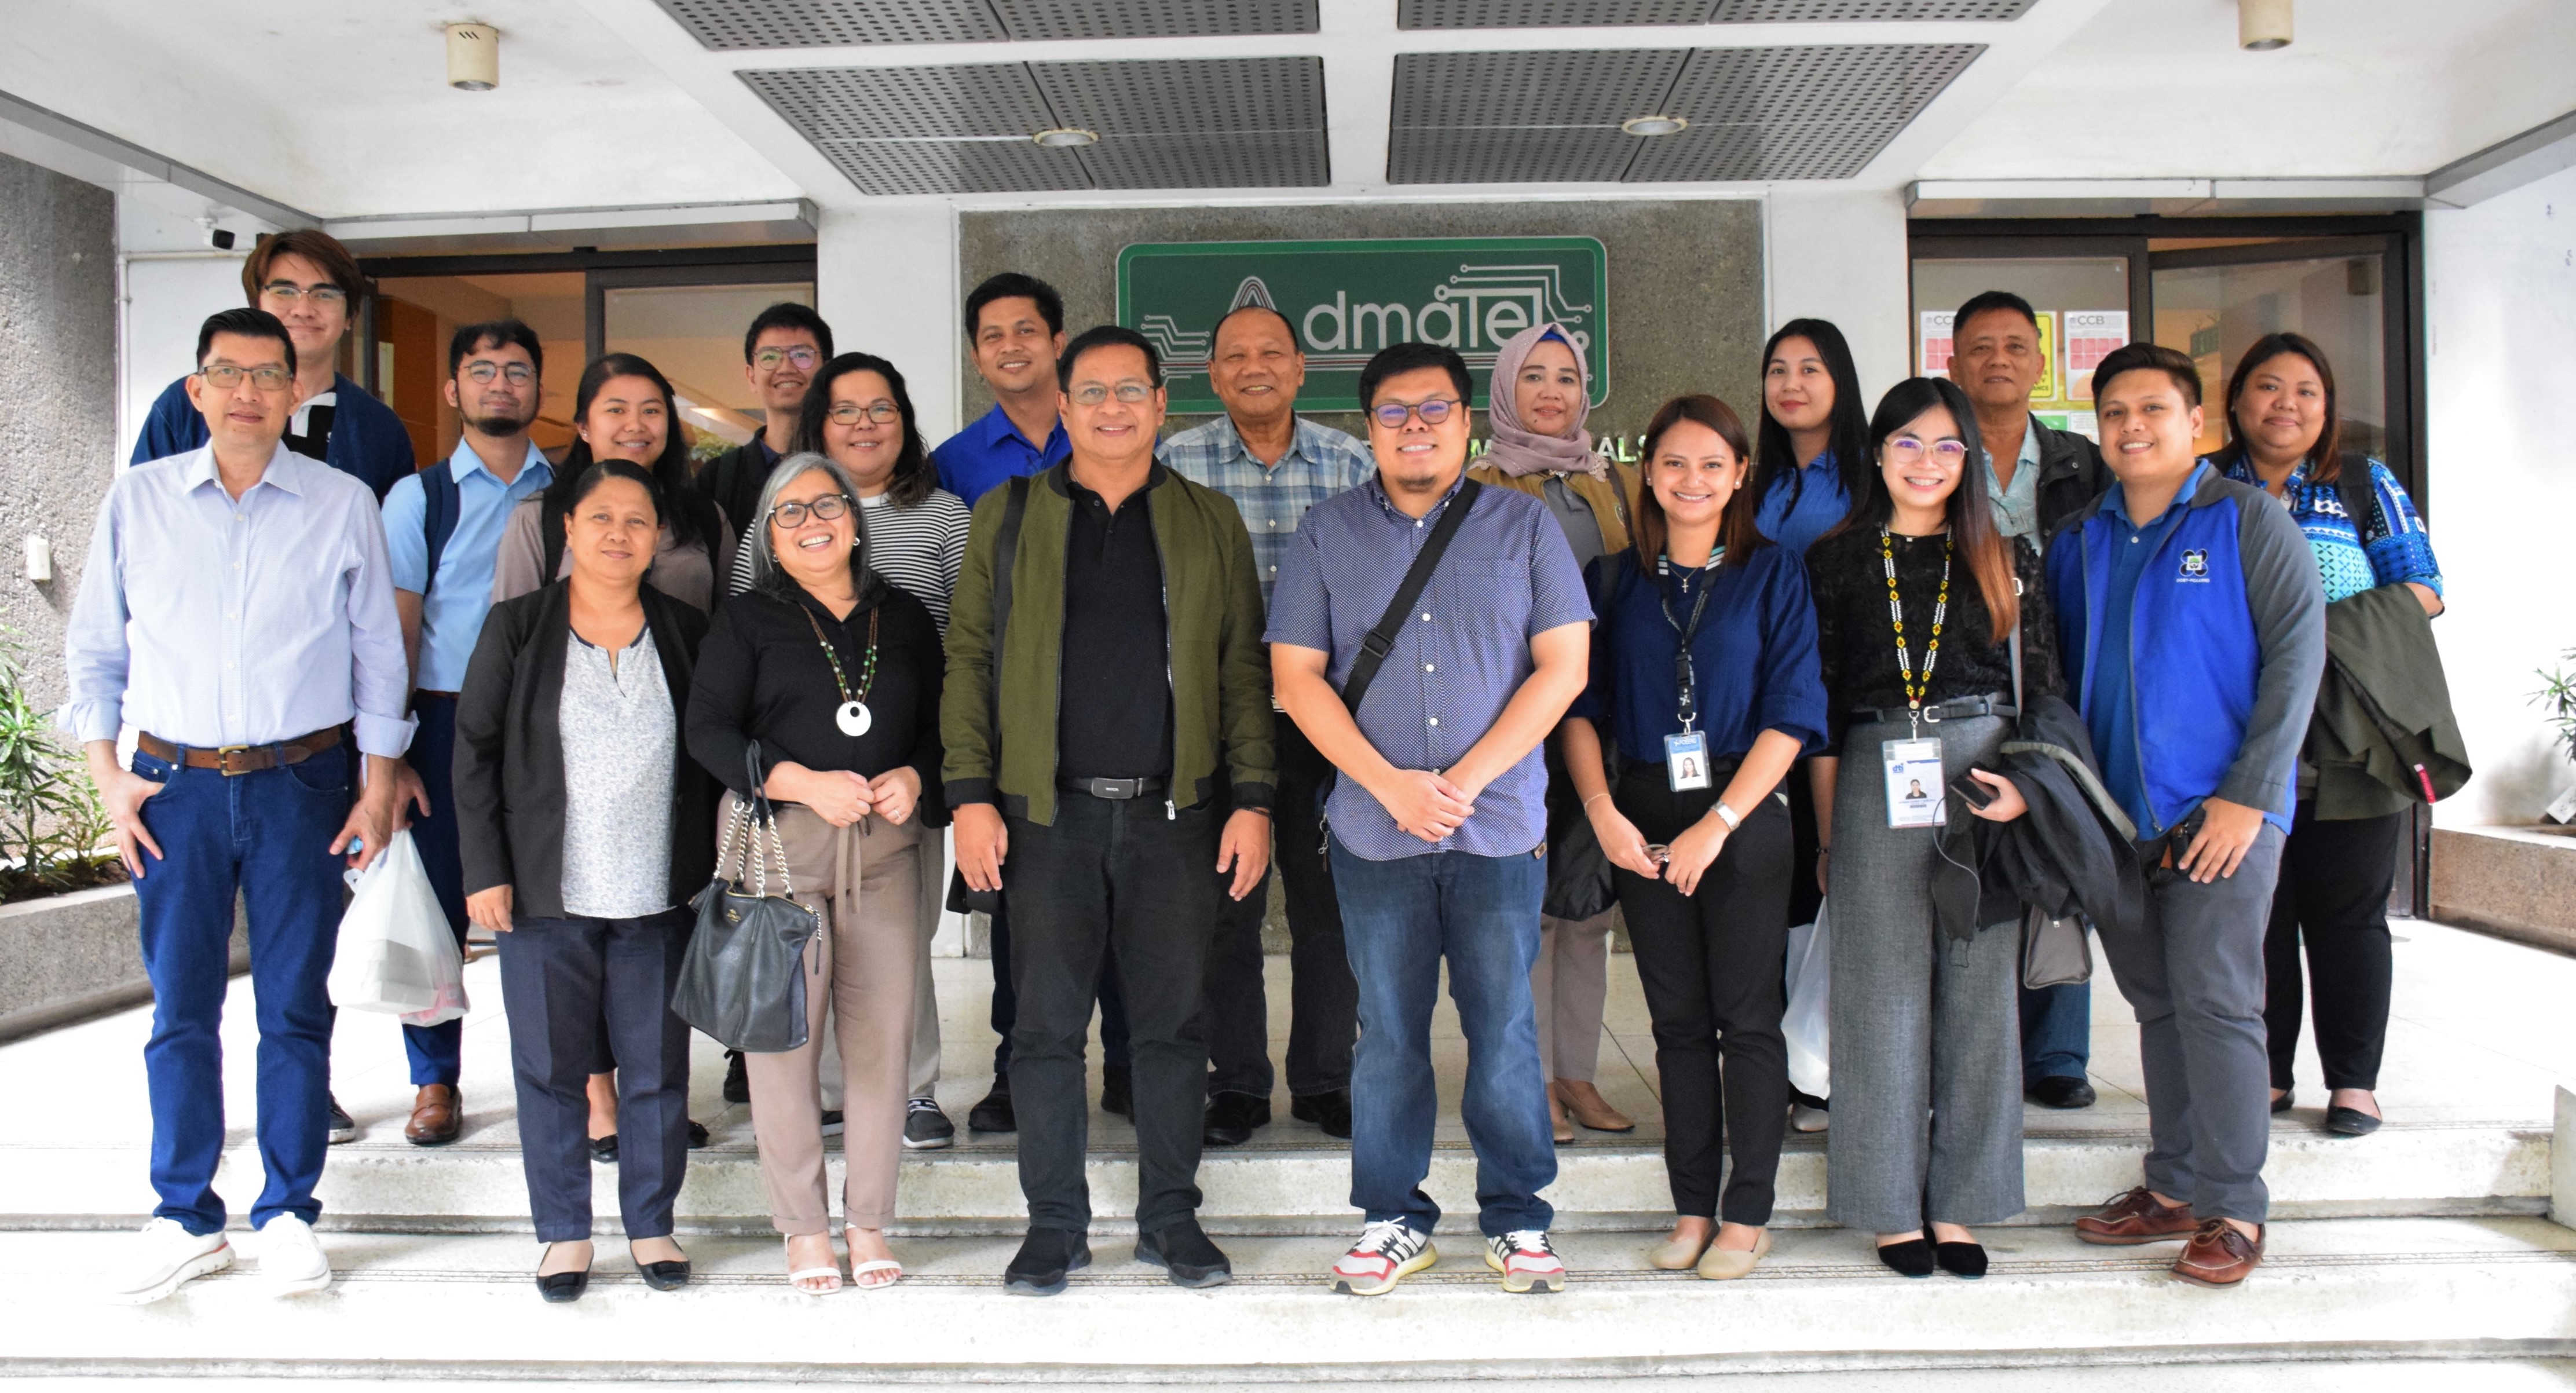 Some of the participants of the 31st PHLRUBBER Technical Working Meeting composed of different government and private agencies. (Image credit: FERD, DOST-PCAARRD)